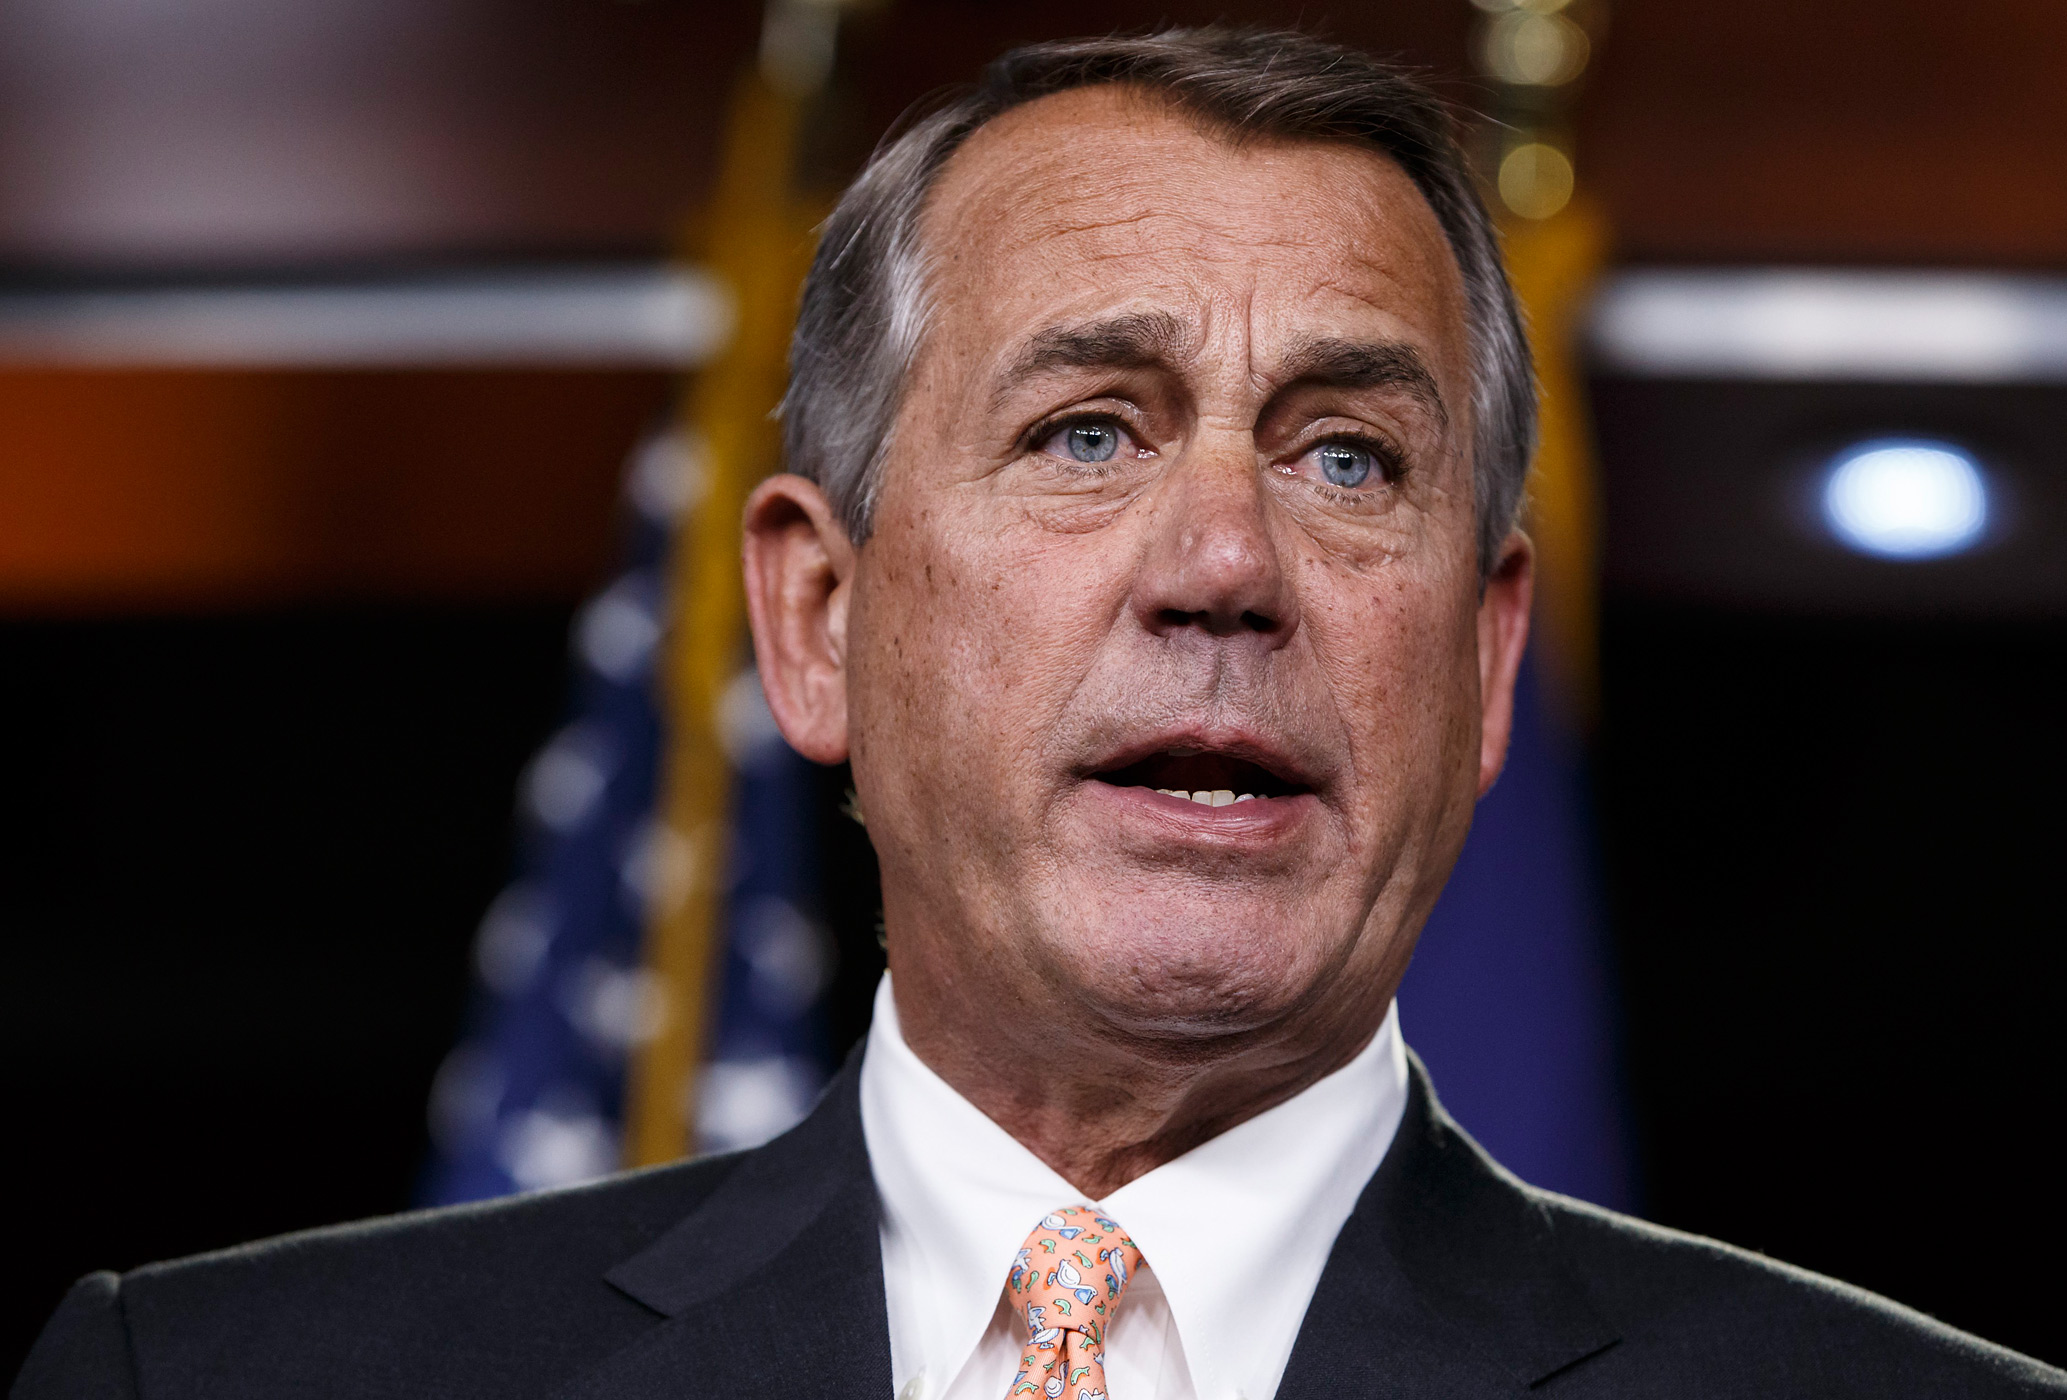 Speaker of the House John Boehner responds to reporters about the impasse over passing the Homeland Security budget because of Republican efforts to block President Barack Obama's executive actions on immigration, at the Capitol in Washington on Feb. 26, 2015. (J. Scott Applewhite—AP)